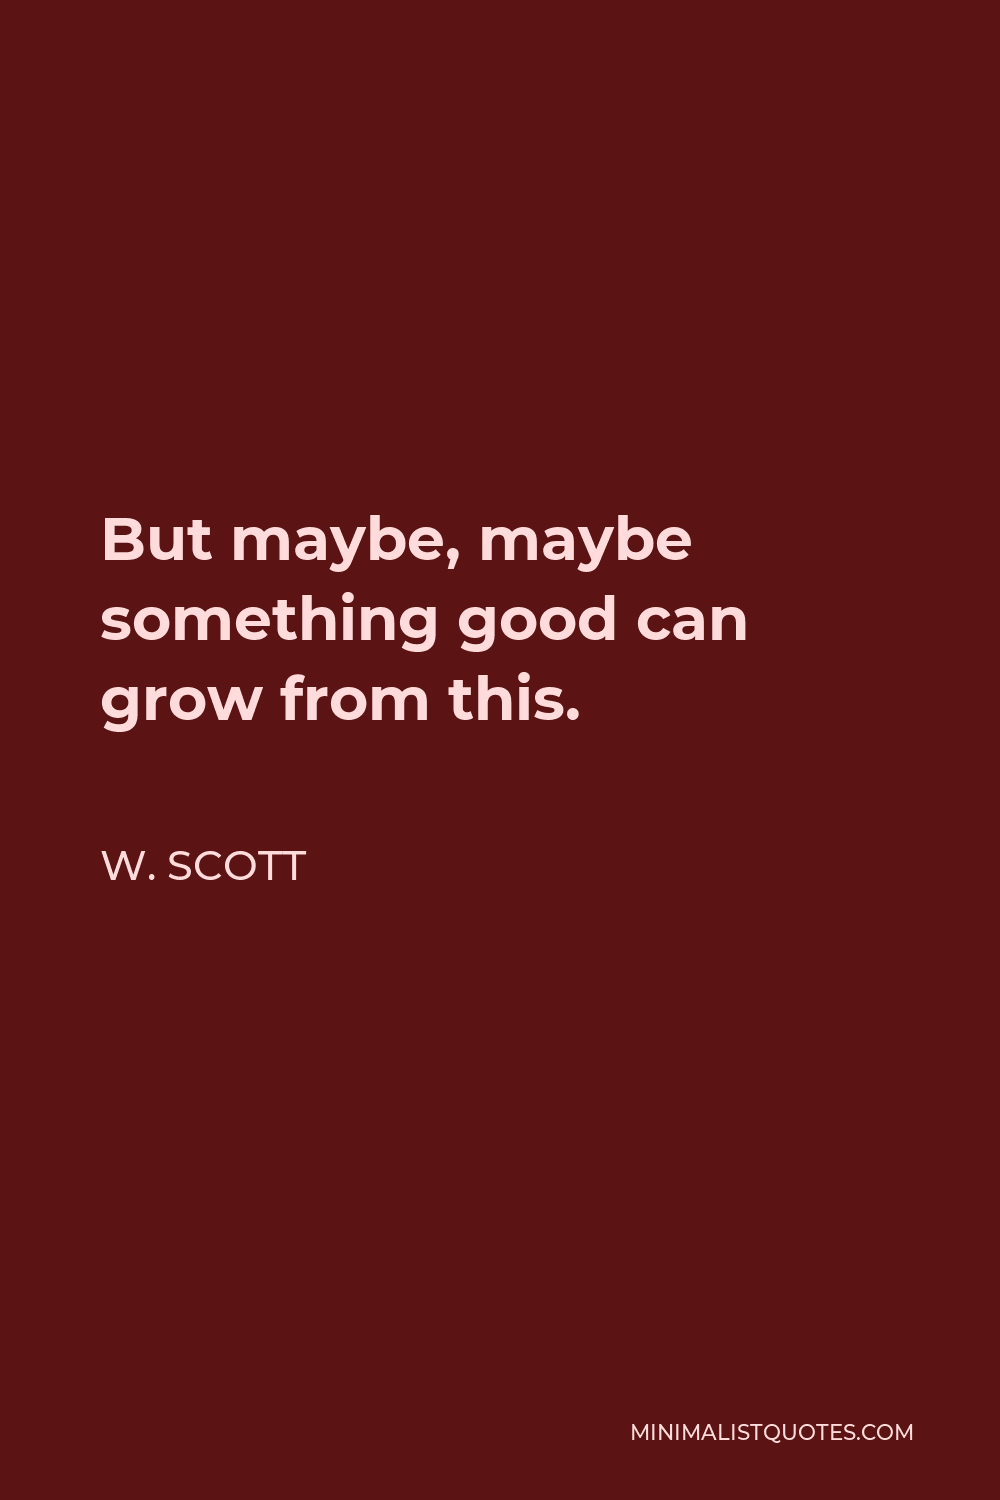 W. Scott Quote - But maybe, maybe something good can grow from this.